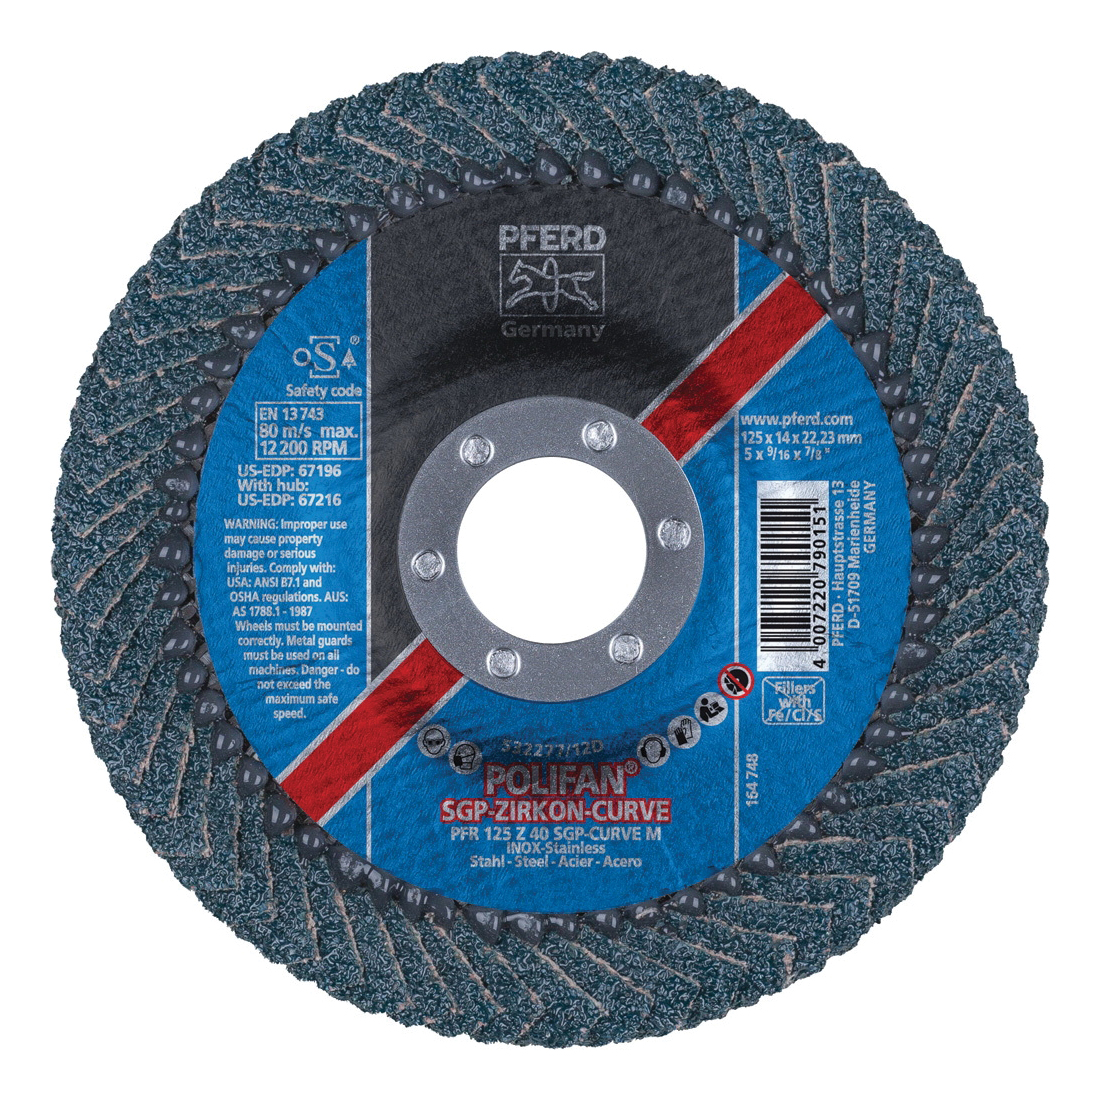 PFERD Polifan® 67196 Special Line SGP Z-CURVE Unthreaded Coated Abrasive Flap Disc, 5 in Dia, 7/8 in Center Hole, 40 Grit, Zirconia Alumina Abrasive, Type PFR/Radial Disc